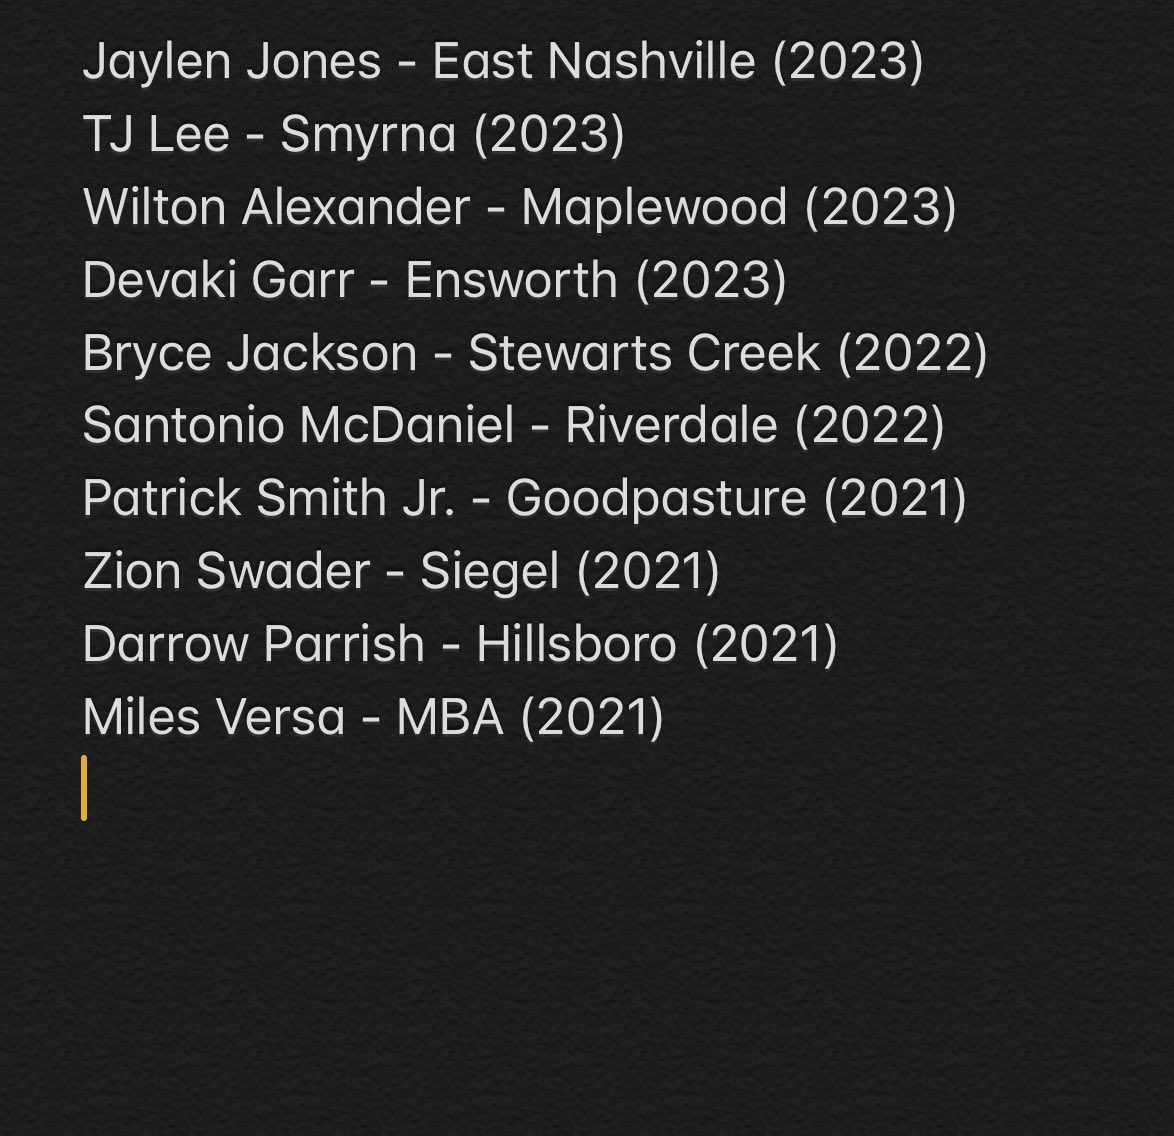 Our top point guards in Middle Tennessee for the 2020-21 season. @Kreager @allaroundgame10 @callmeCoachTee